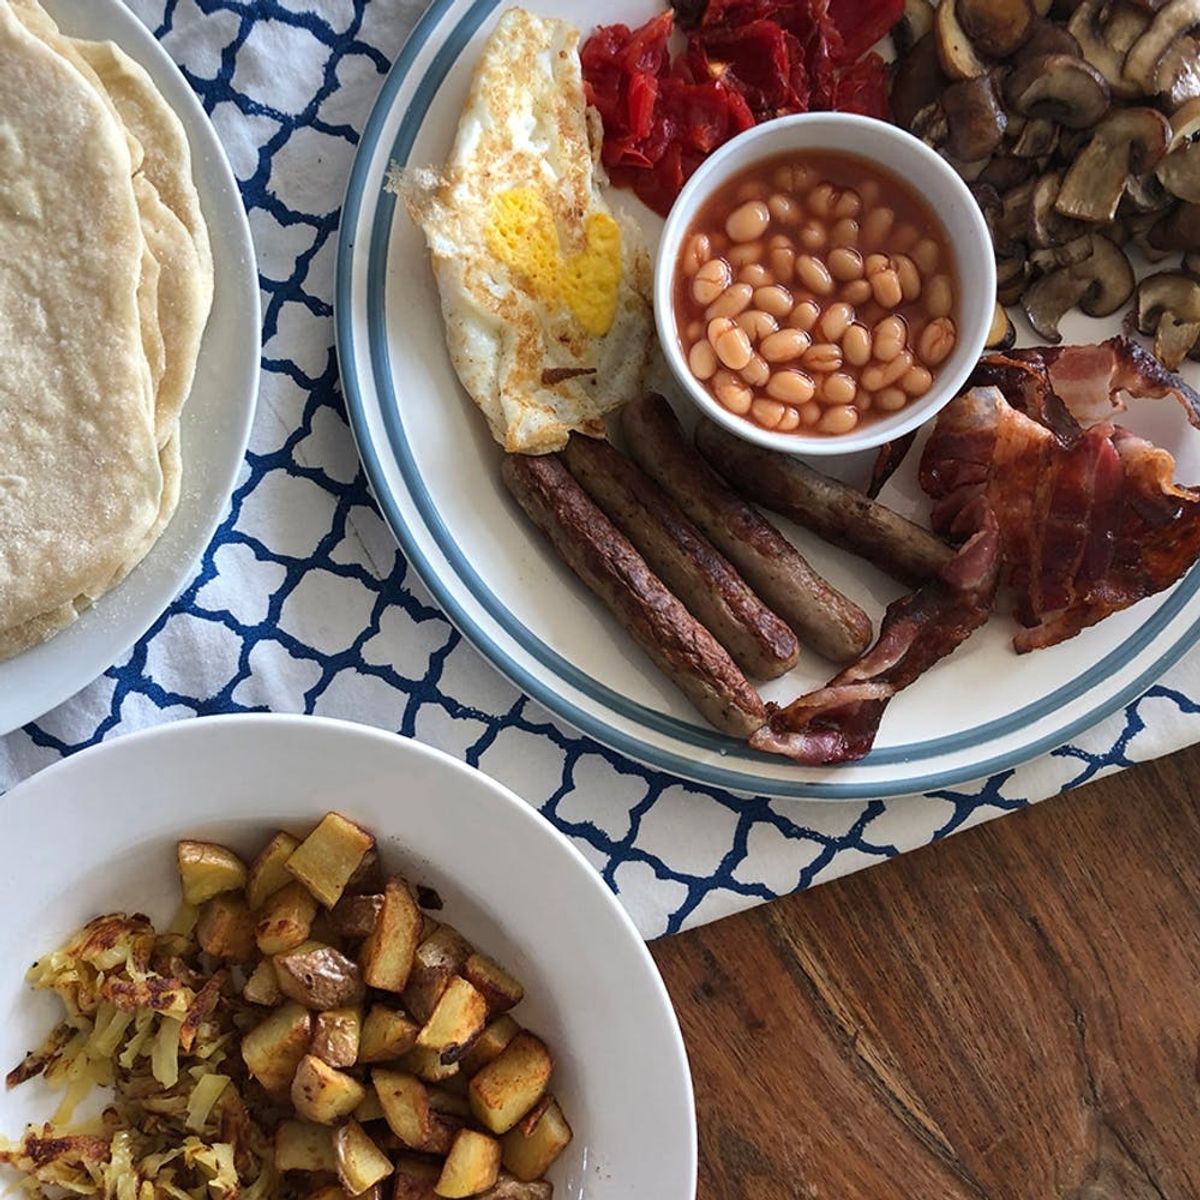 Go British for Breakfast With These Burritos